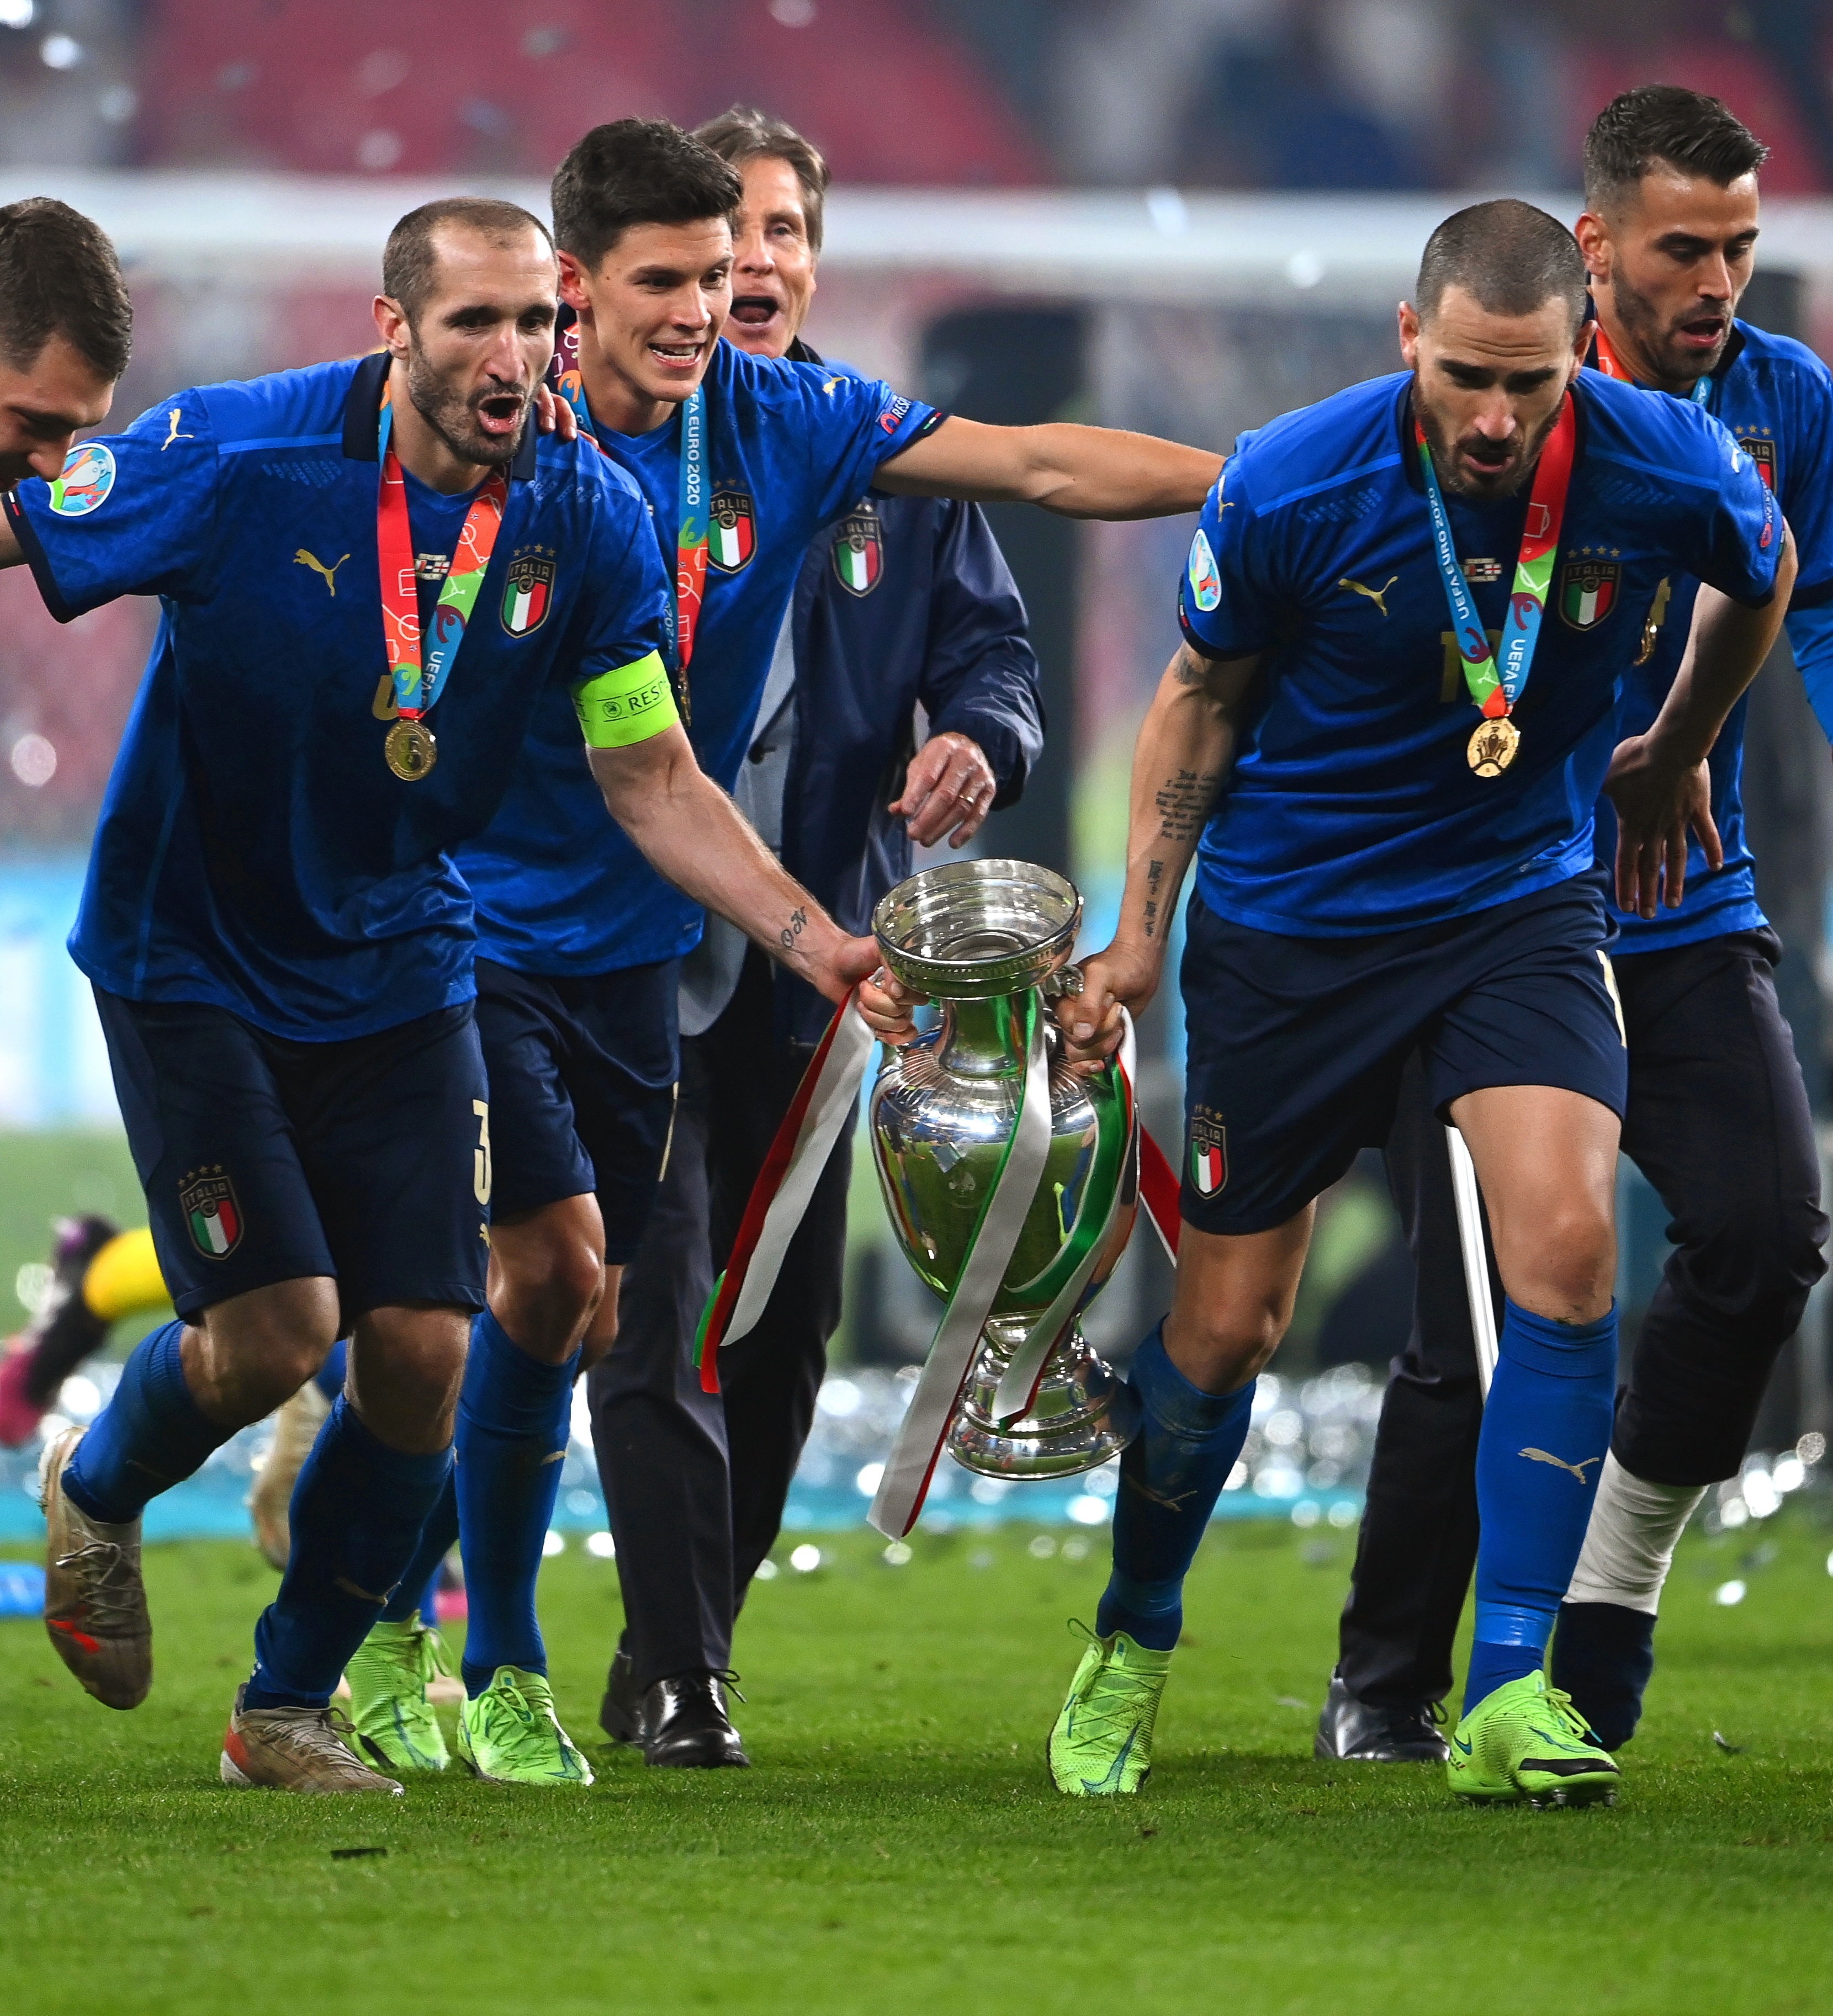 Although Italy did not qualify for the World Cup, they are in the top ten by winning Euro 2020 (Photo: EFE)